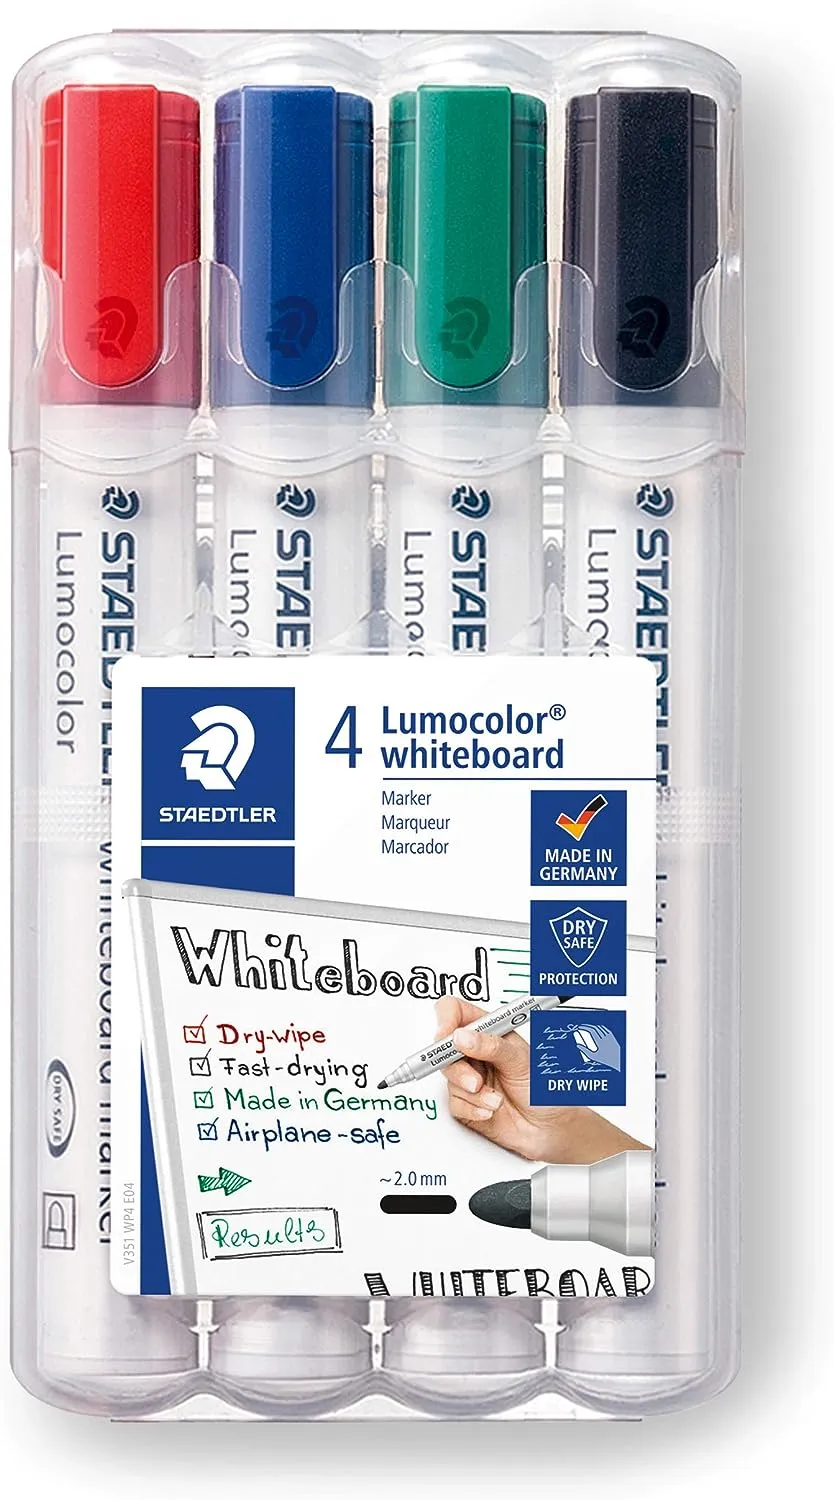 The 6 Best Markers for glass boards